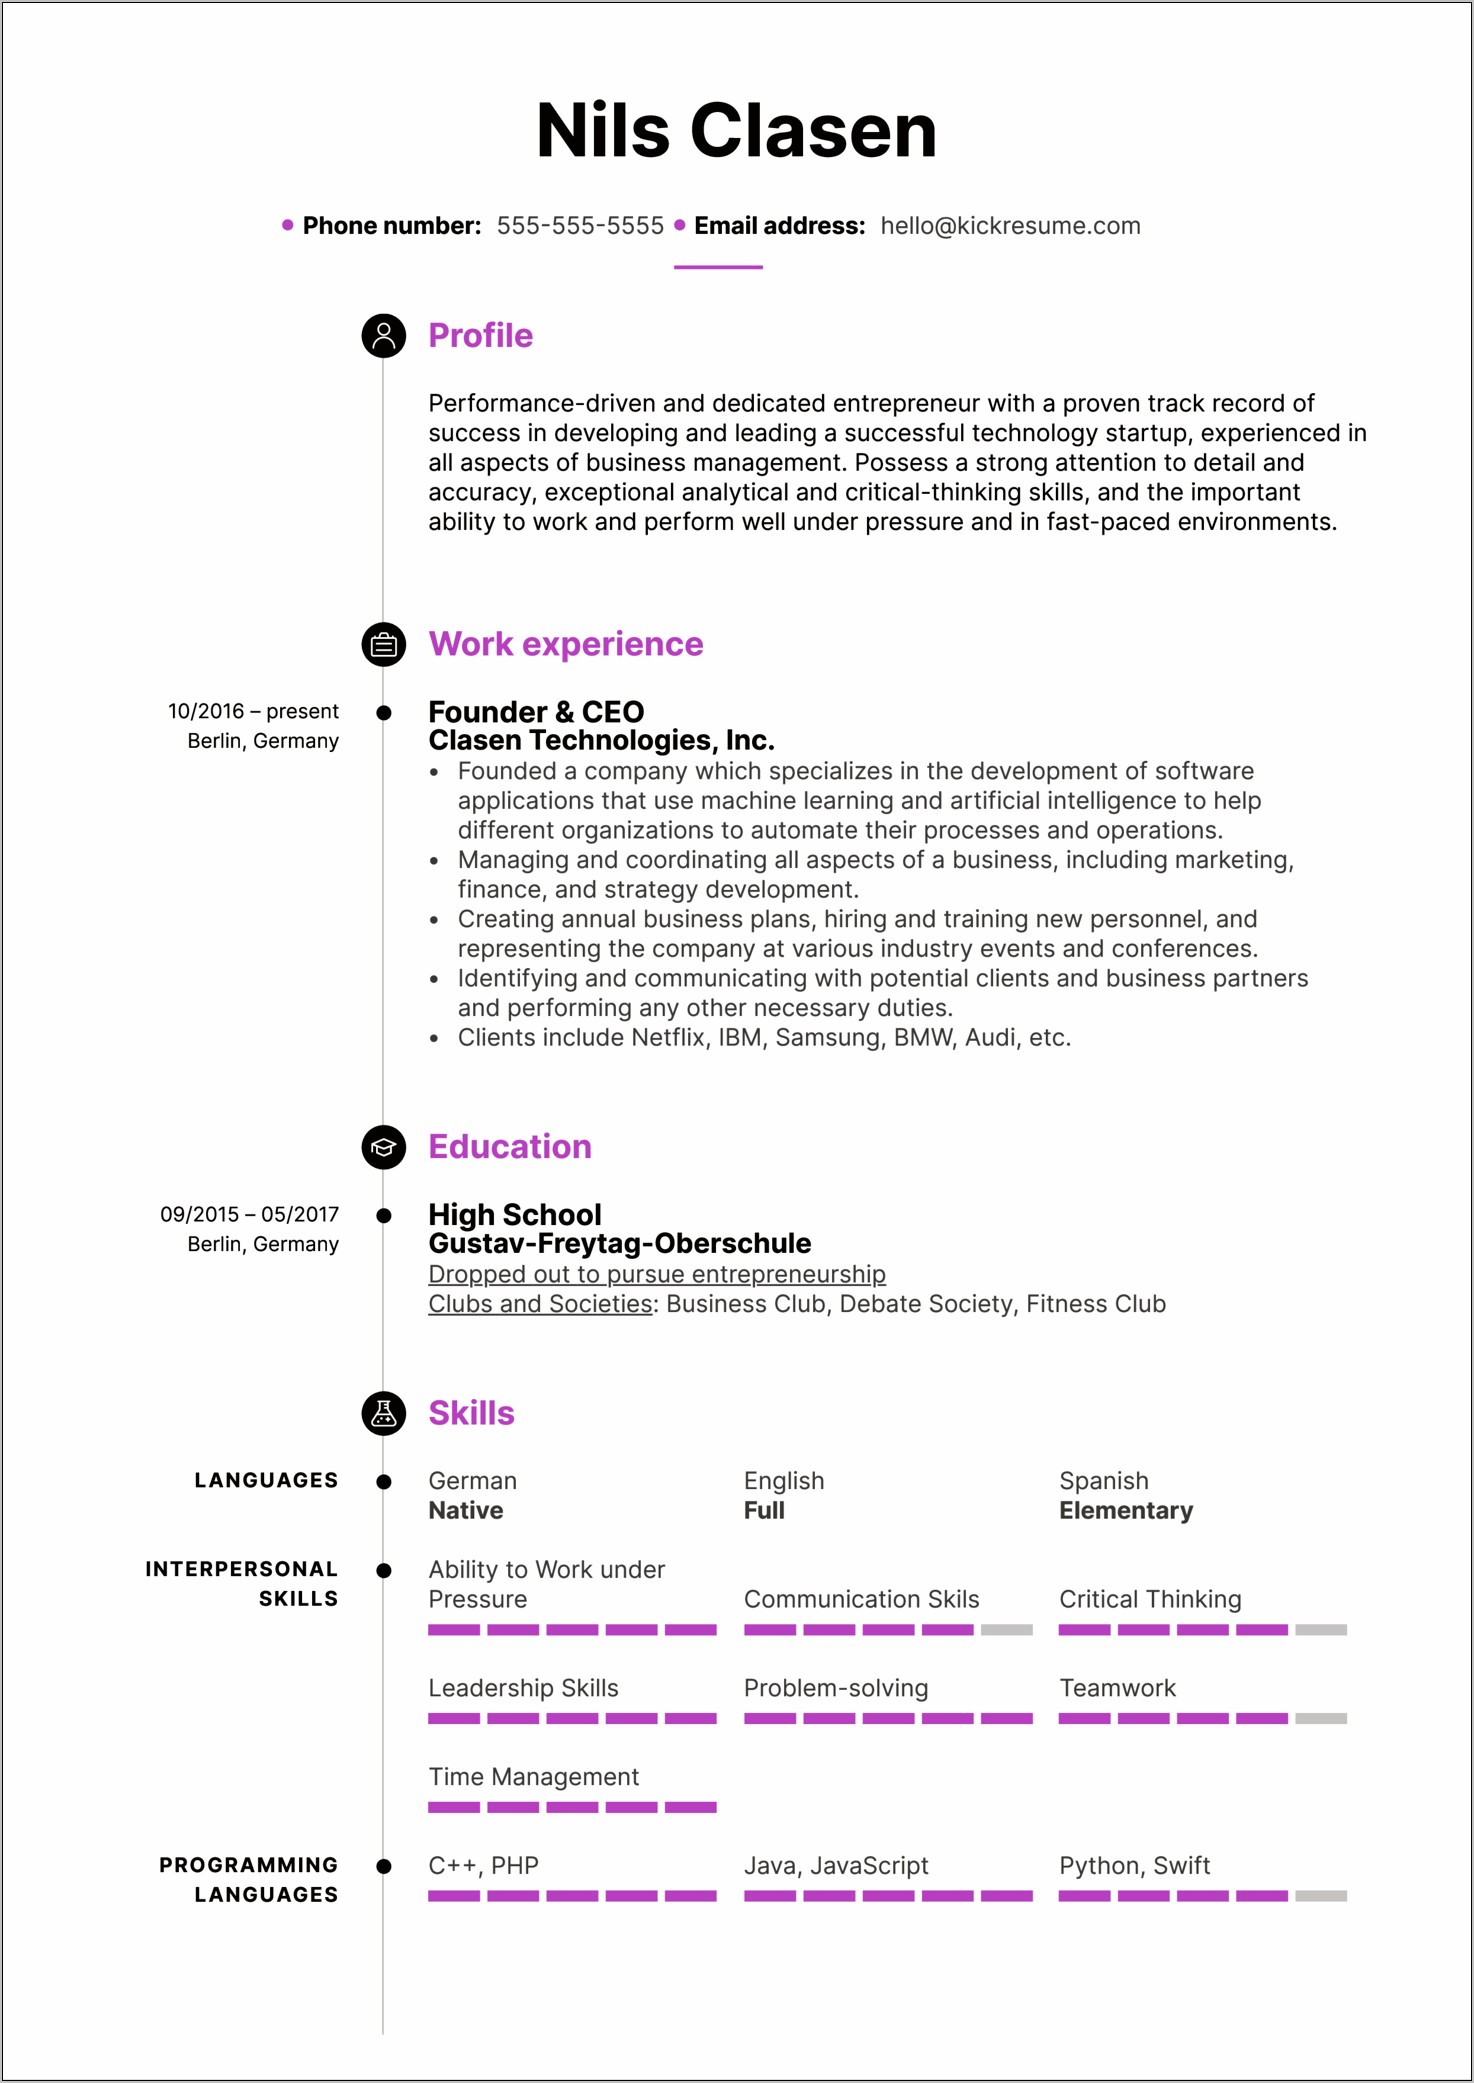 Resume For High School Students Fee